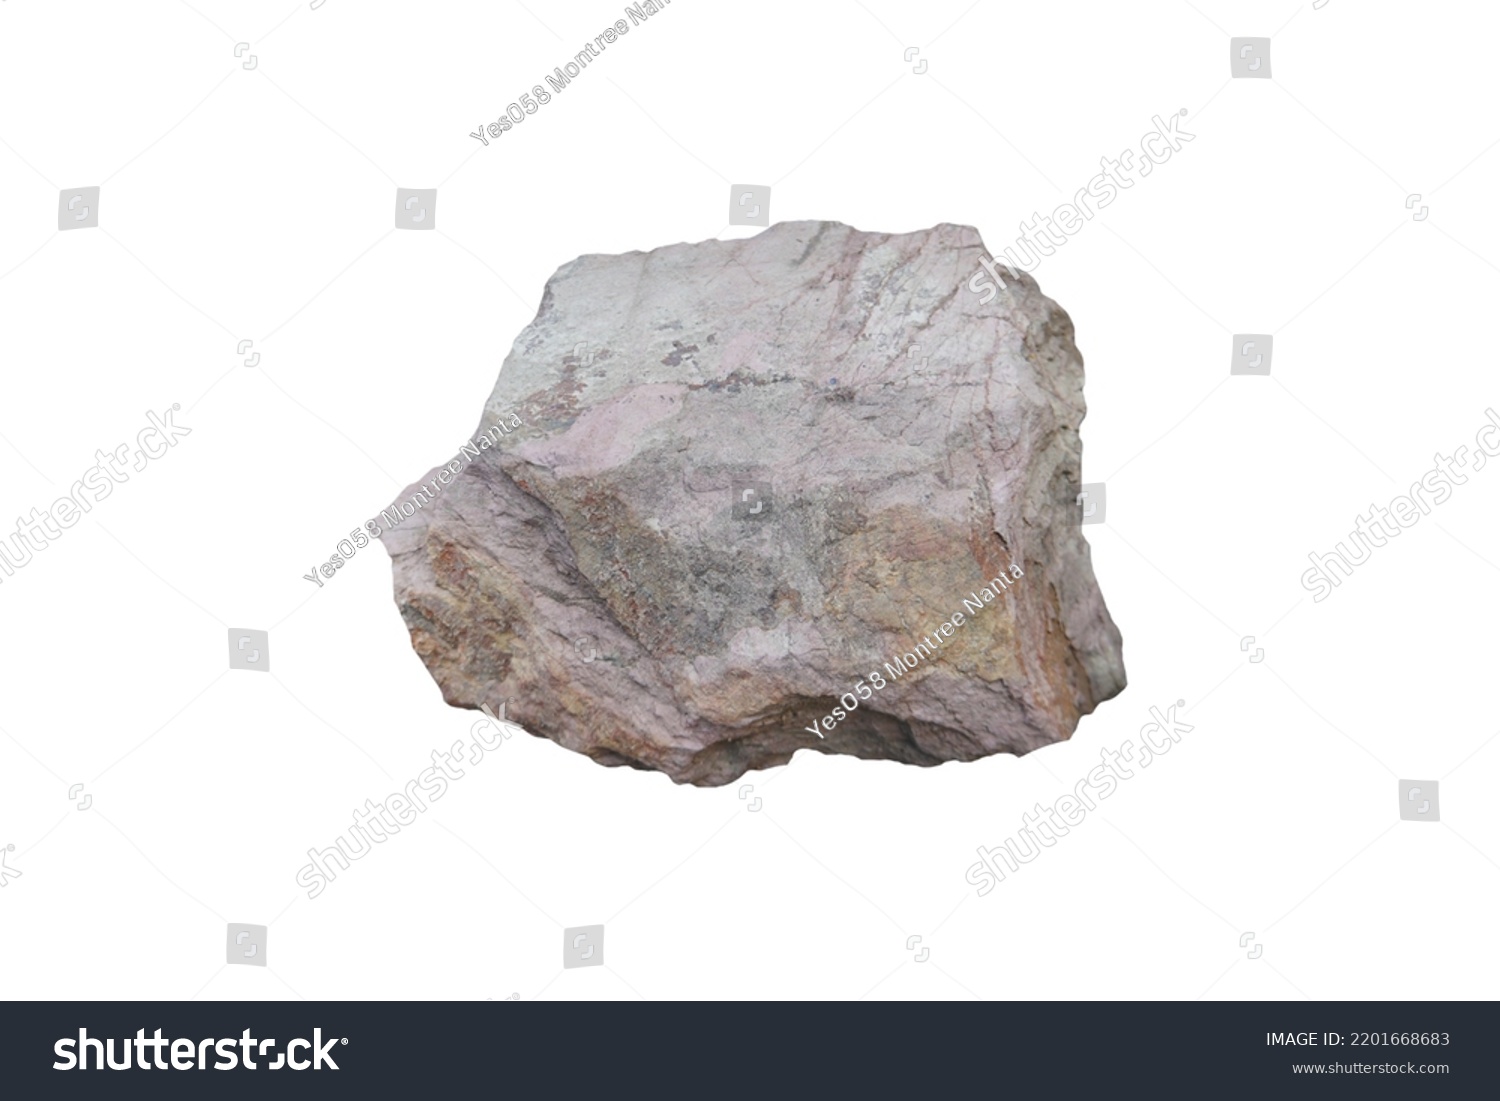 A sample natural raw of shale stone is isolated on white background. #2201668683